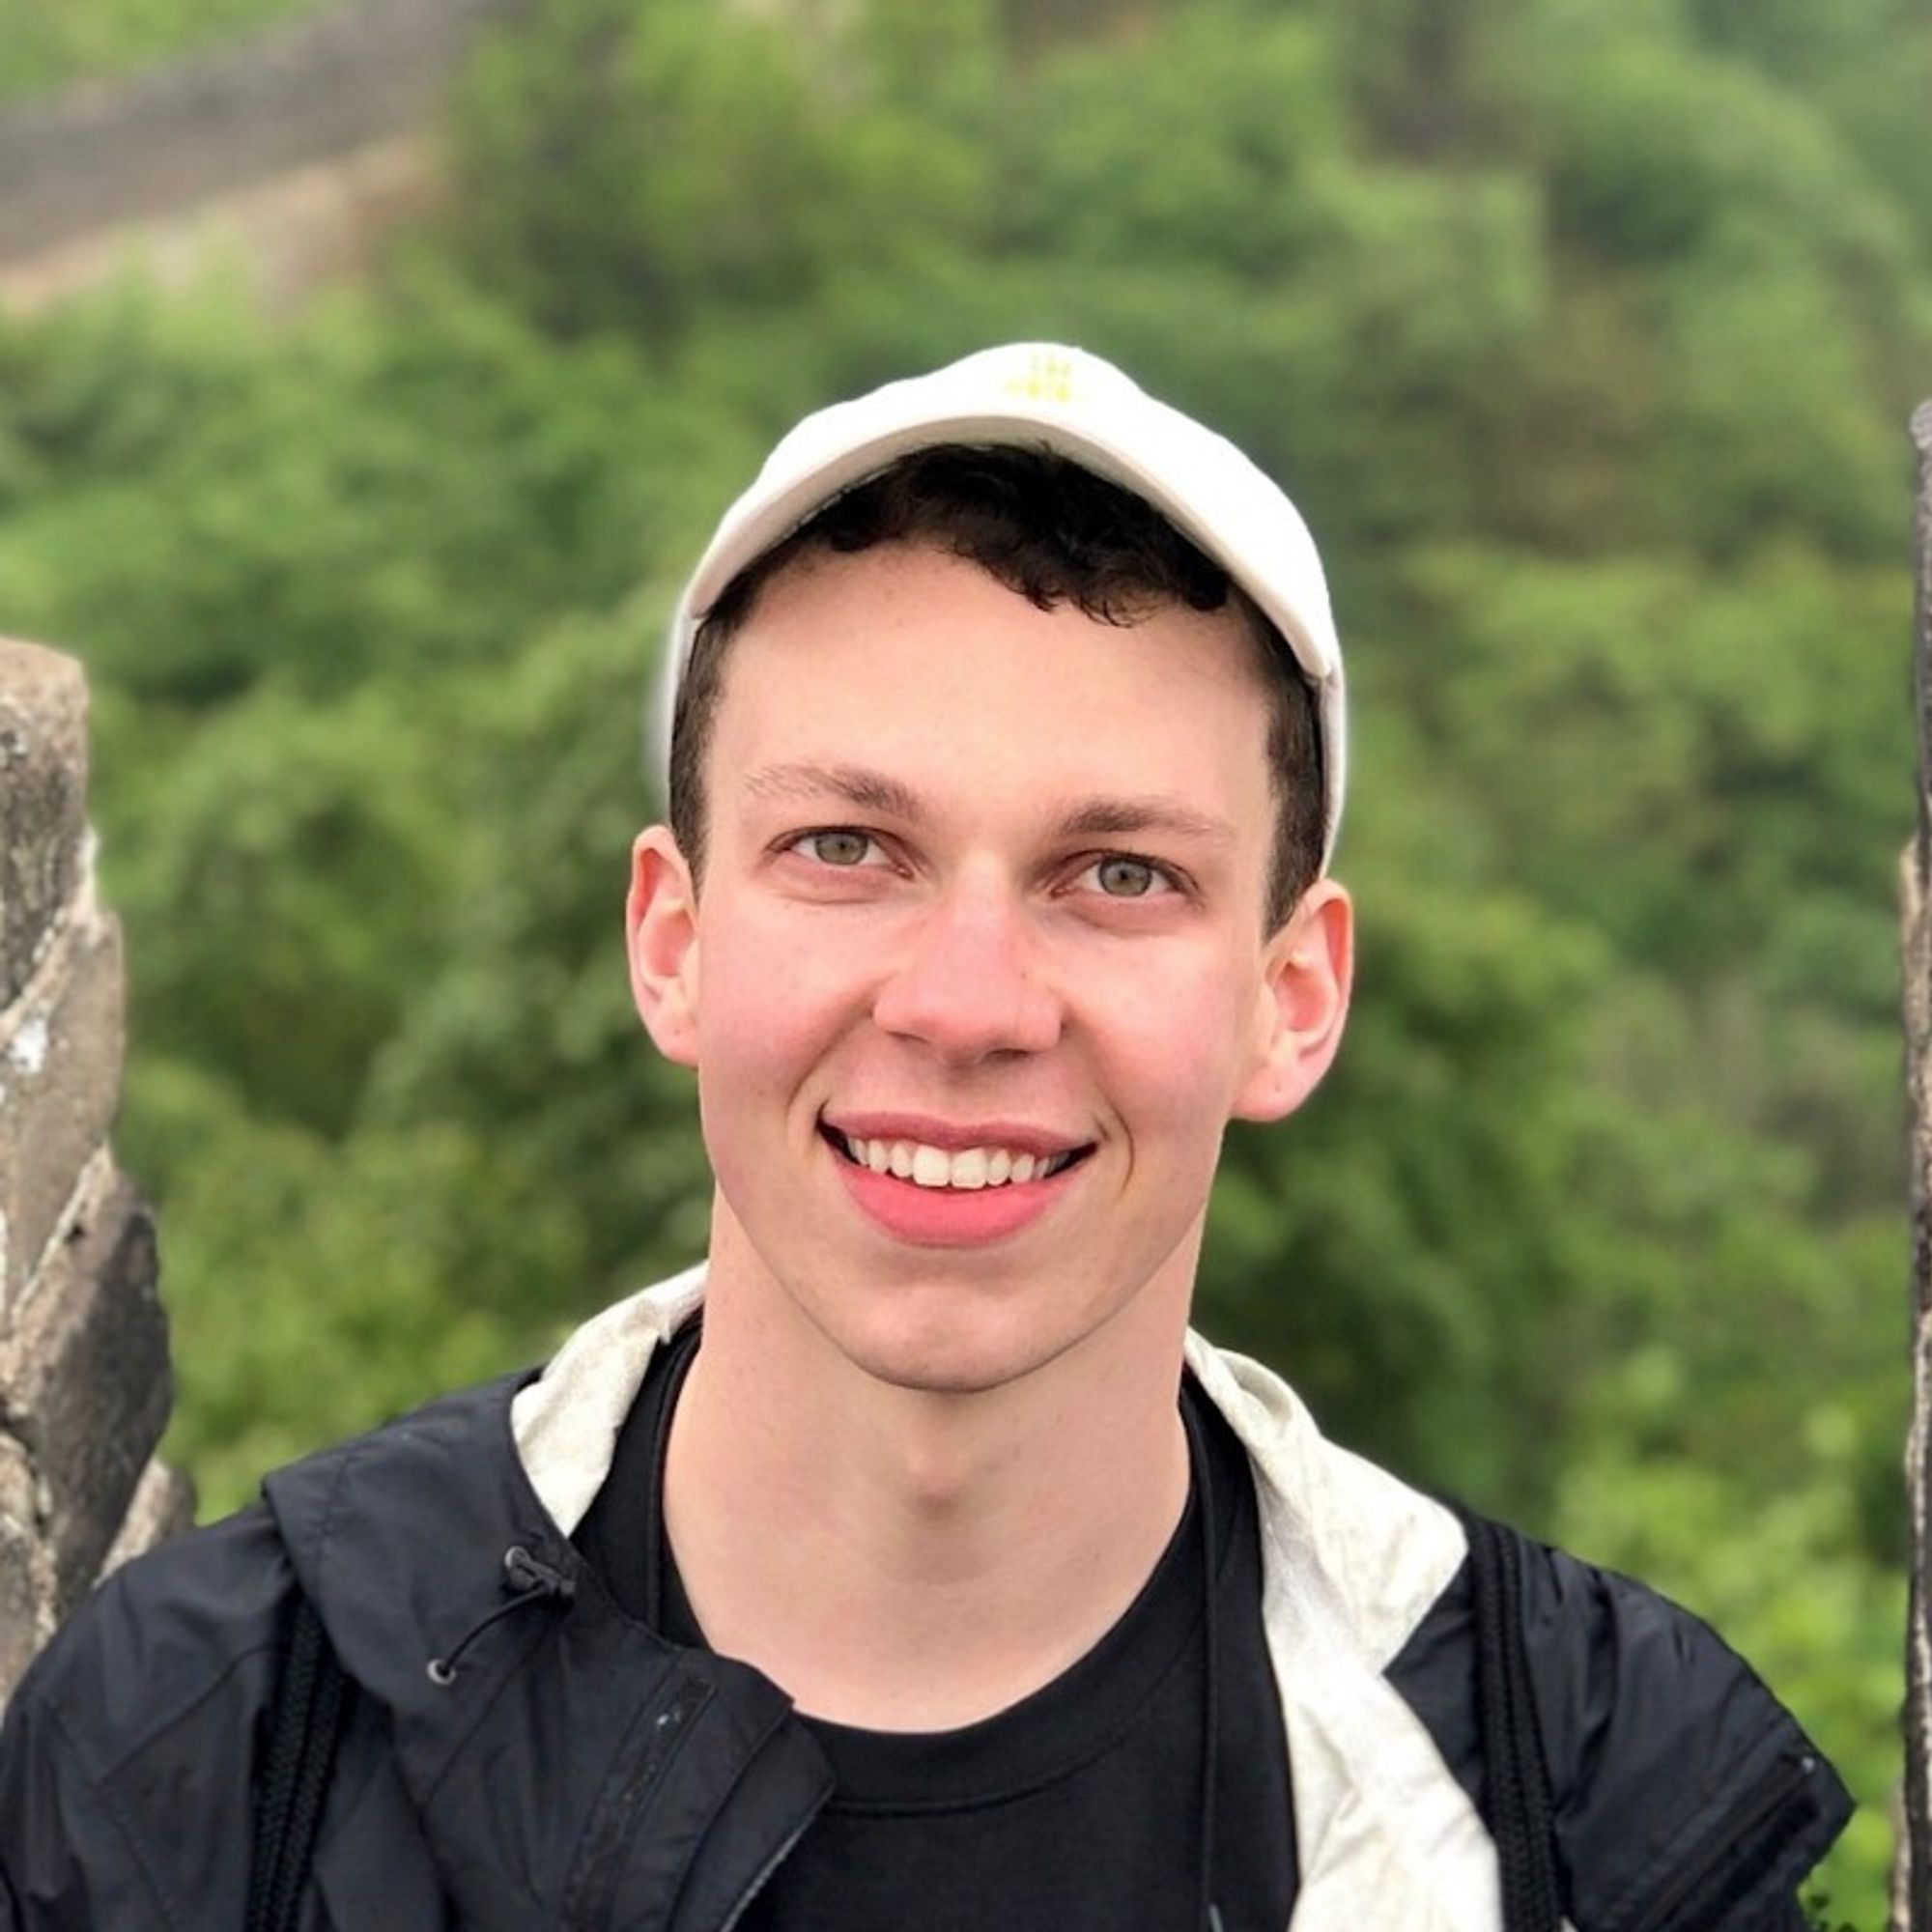 Andrew Hunt 
Software Engineer 
Prior Staff Engineer @Jumpstart and Airbnb • Enjoy singing/playing piano, and playing Smash (but much worse than Raymond) 